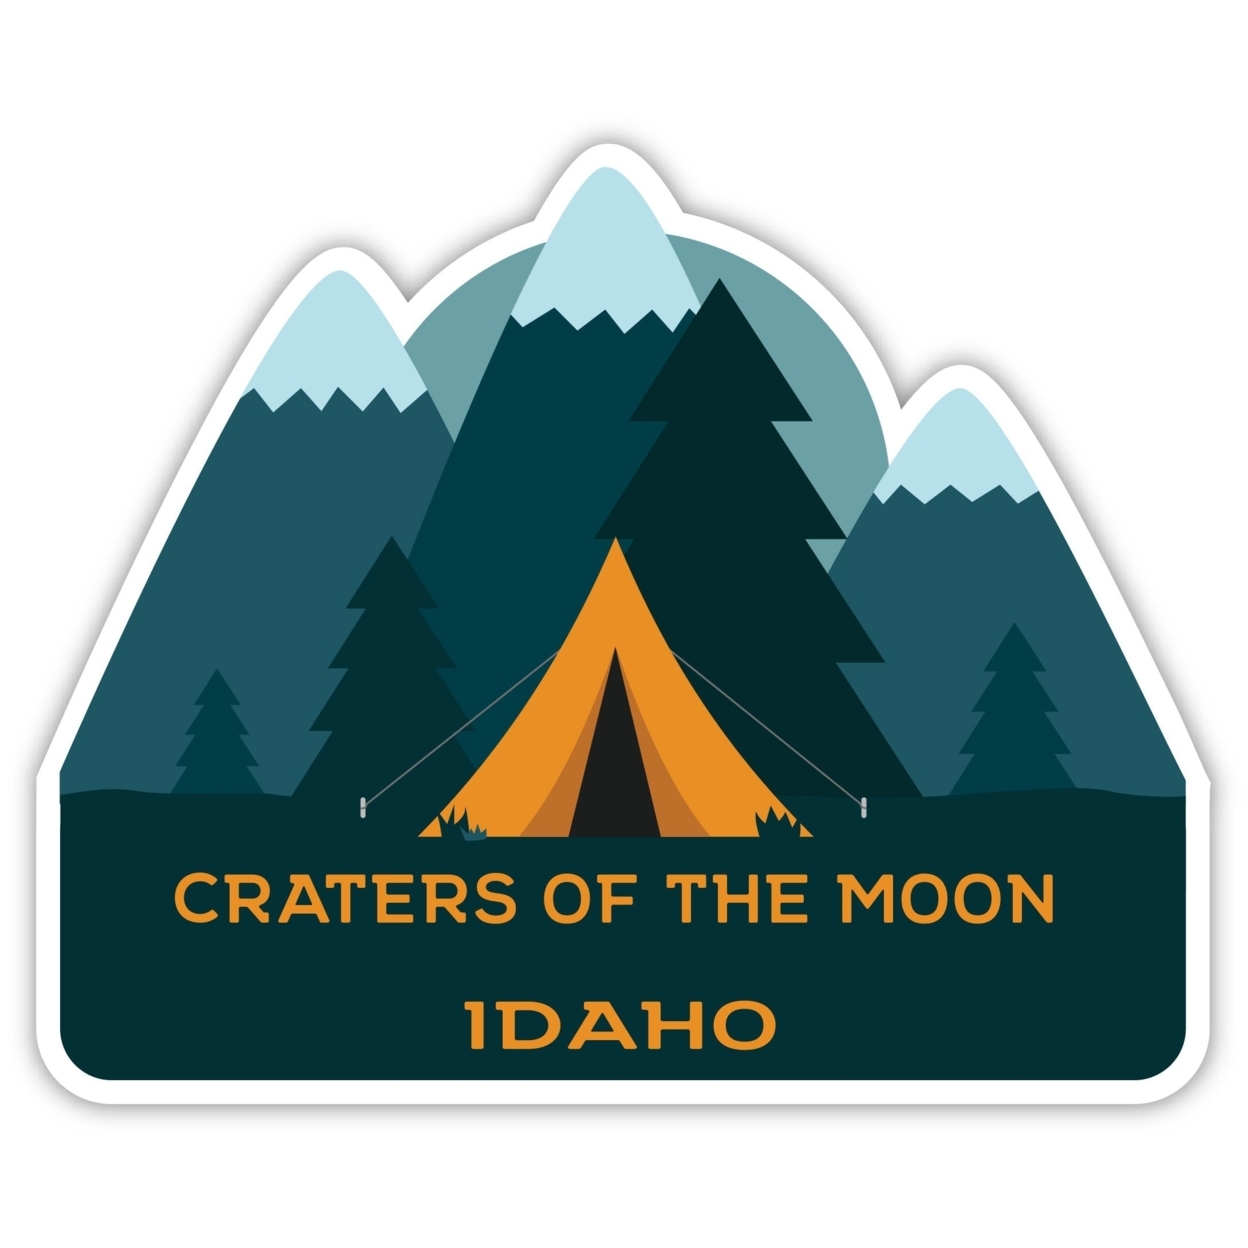 Craters Of The Moon Idaho Souvenir Decorative Stickers (Choose Theme And Size) - Single Unit, 8-Inch, Bear